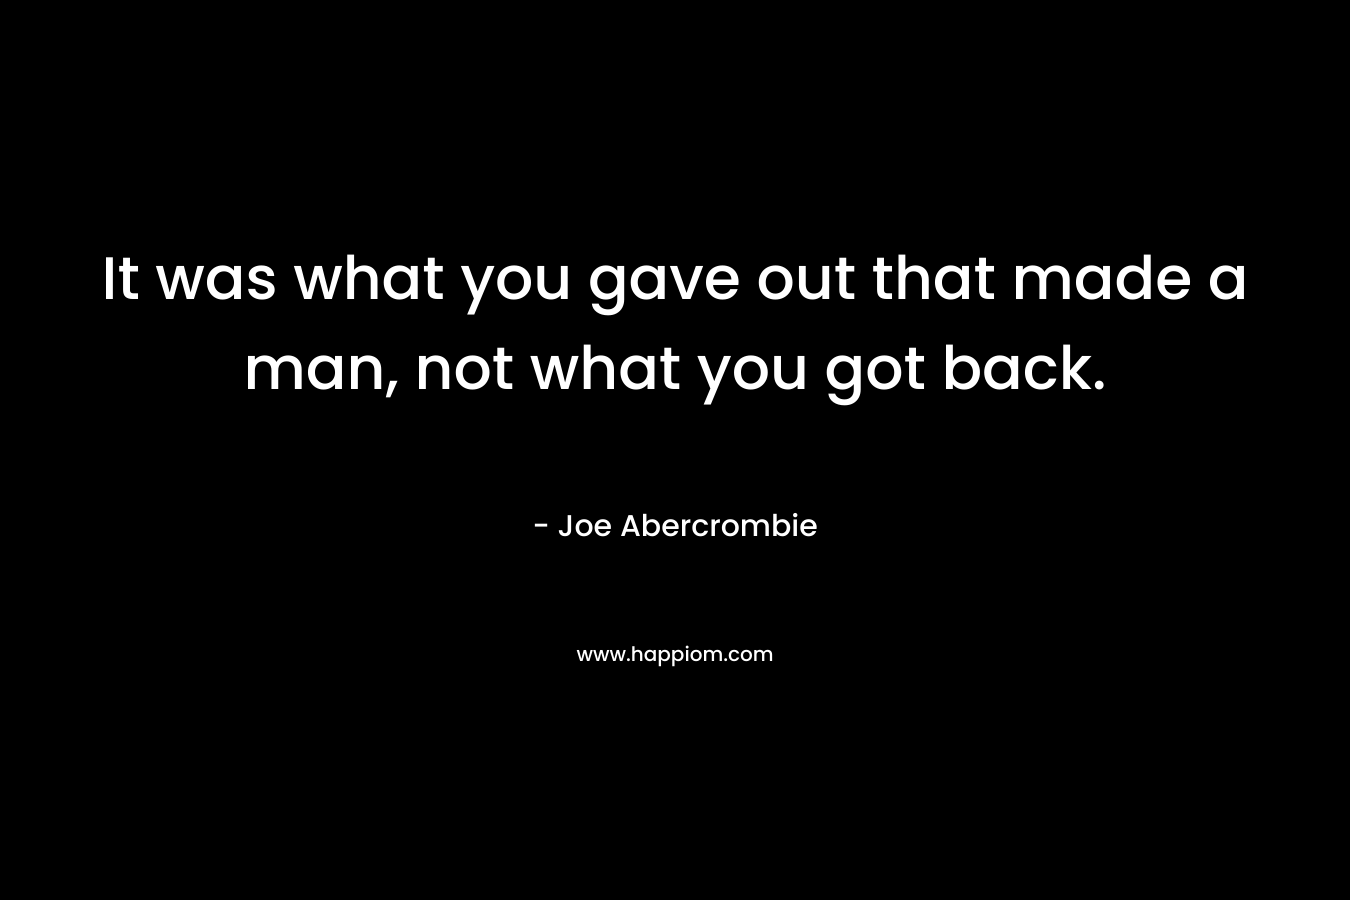 It was what you gave out that made a man, not what you got back.